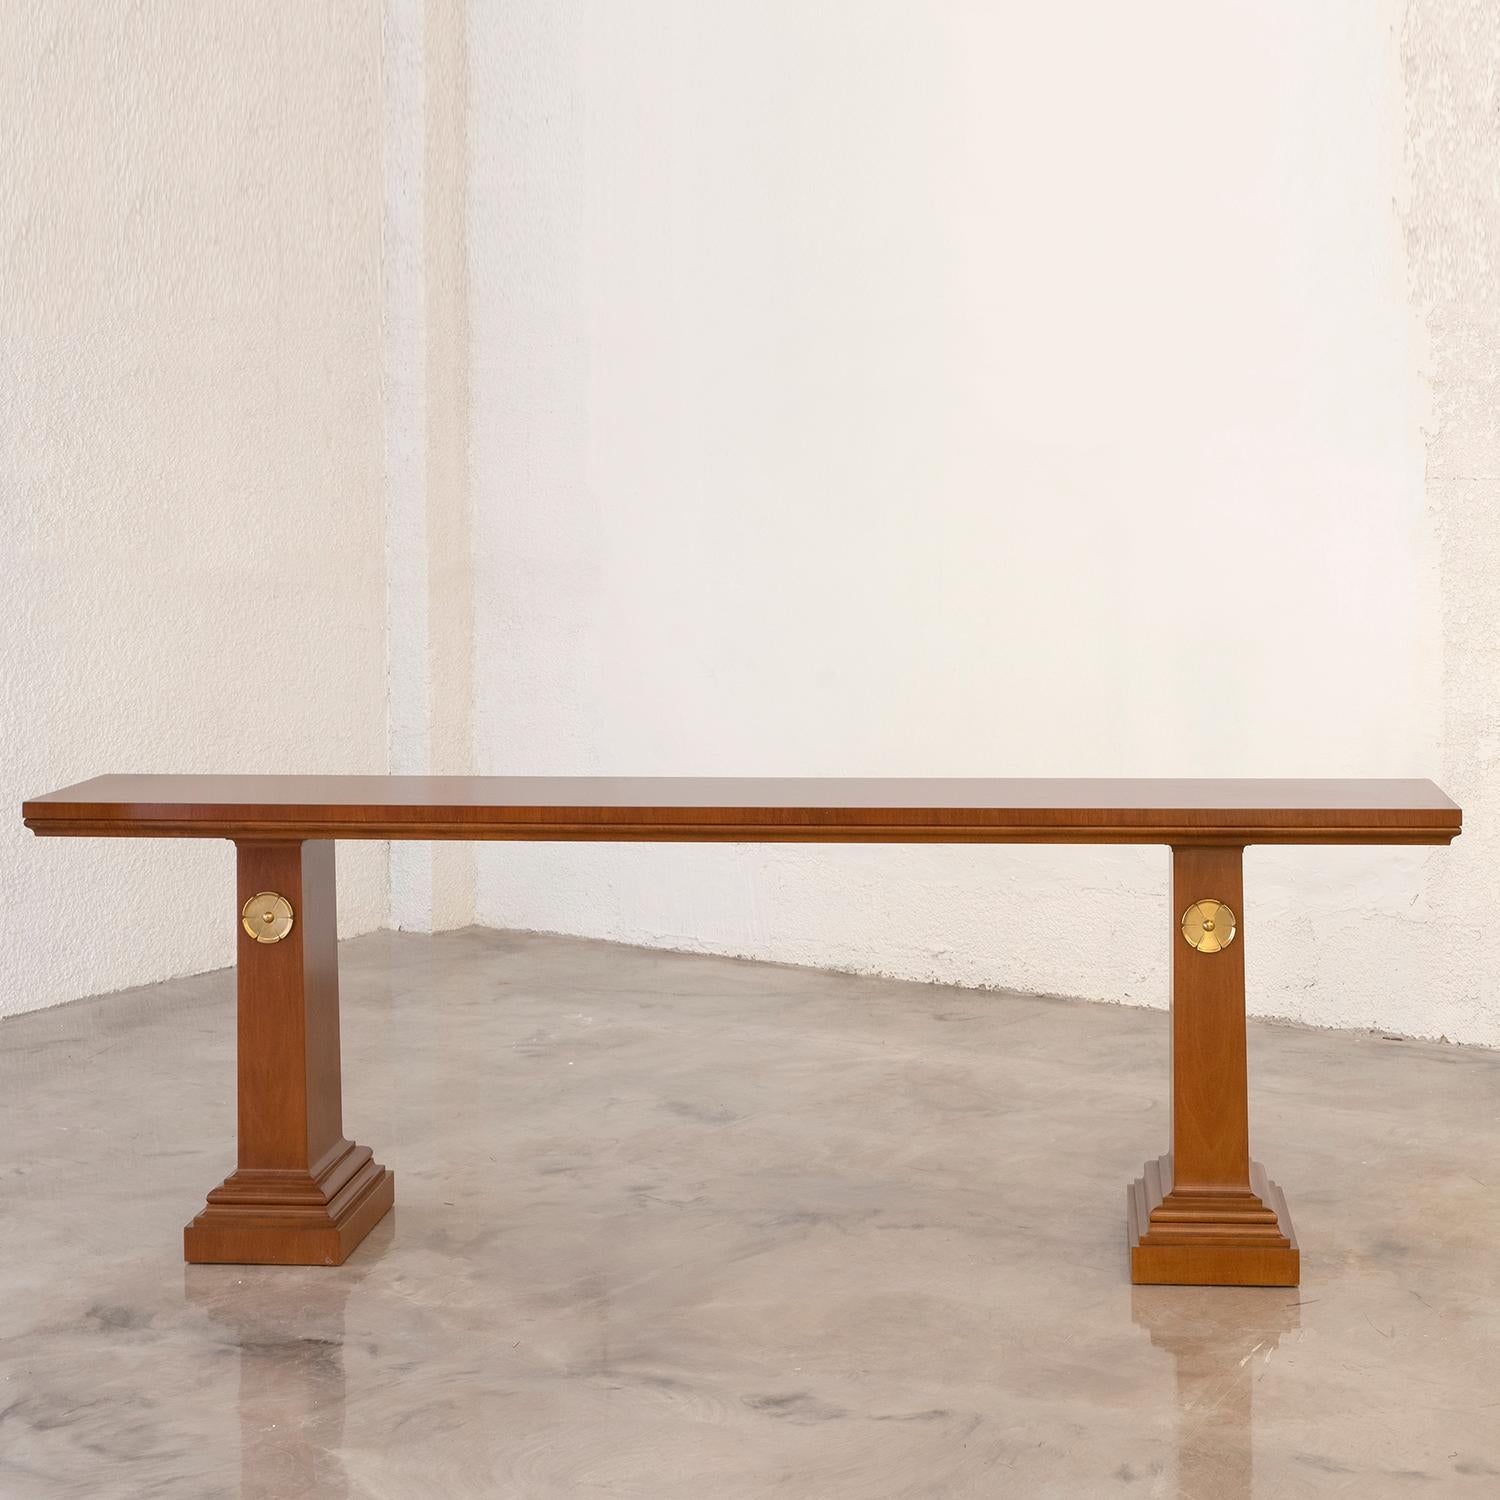 A light-brown, vintage Mid-Century Modern Greek console table made of hand crafted polished Walnut, designed by T.H. Robsjohn-Gibbings and produced by Saridis of Athens, in good condition. The tall freestanding end table is supported by two wooden